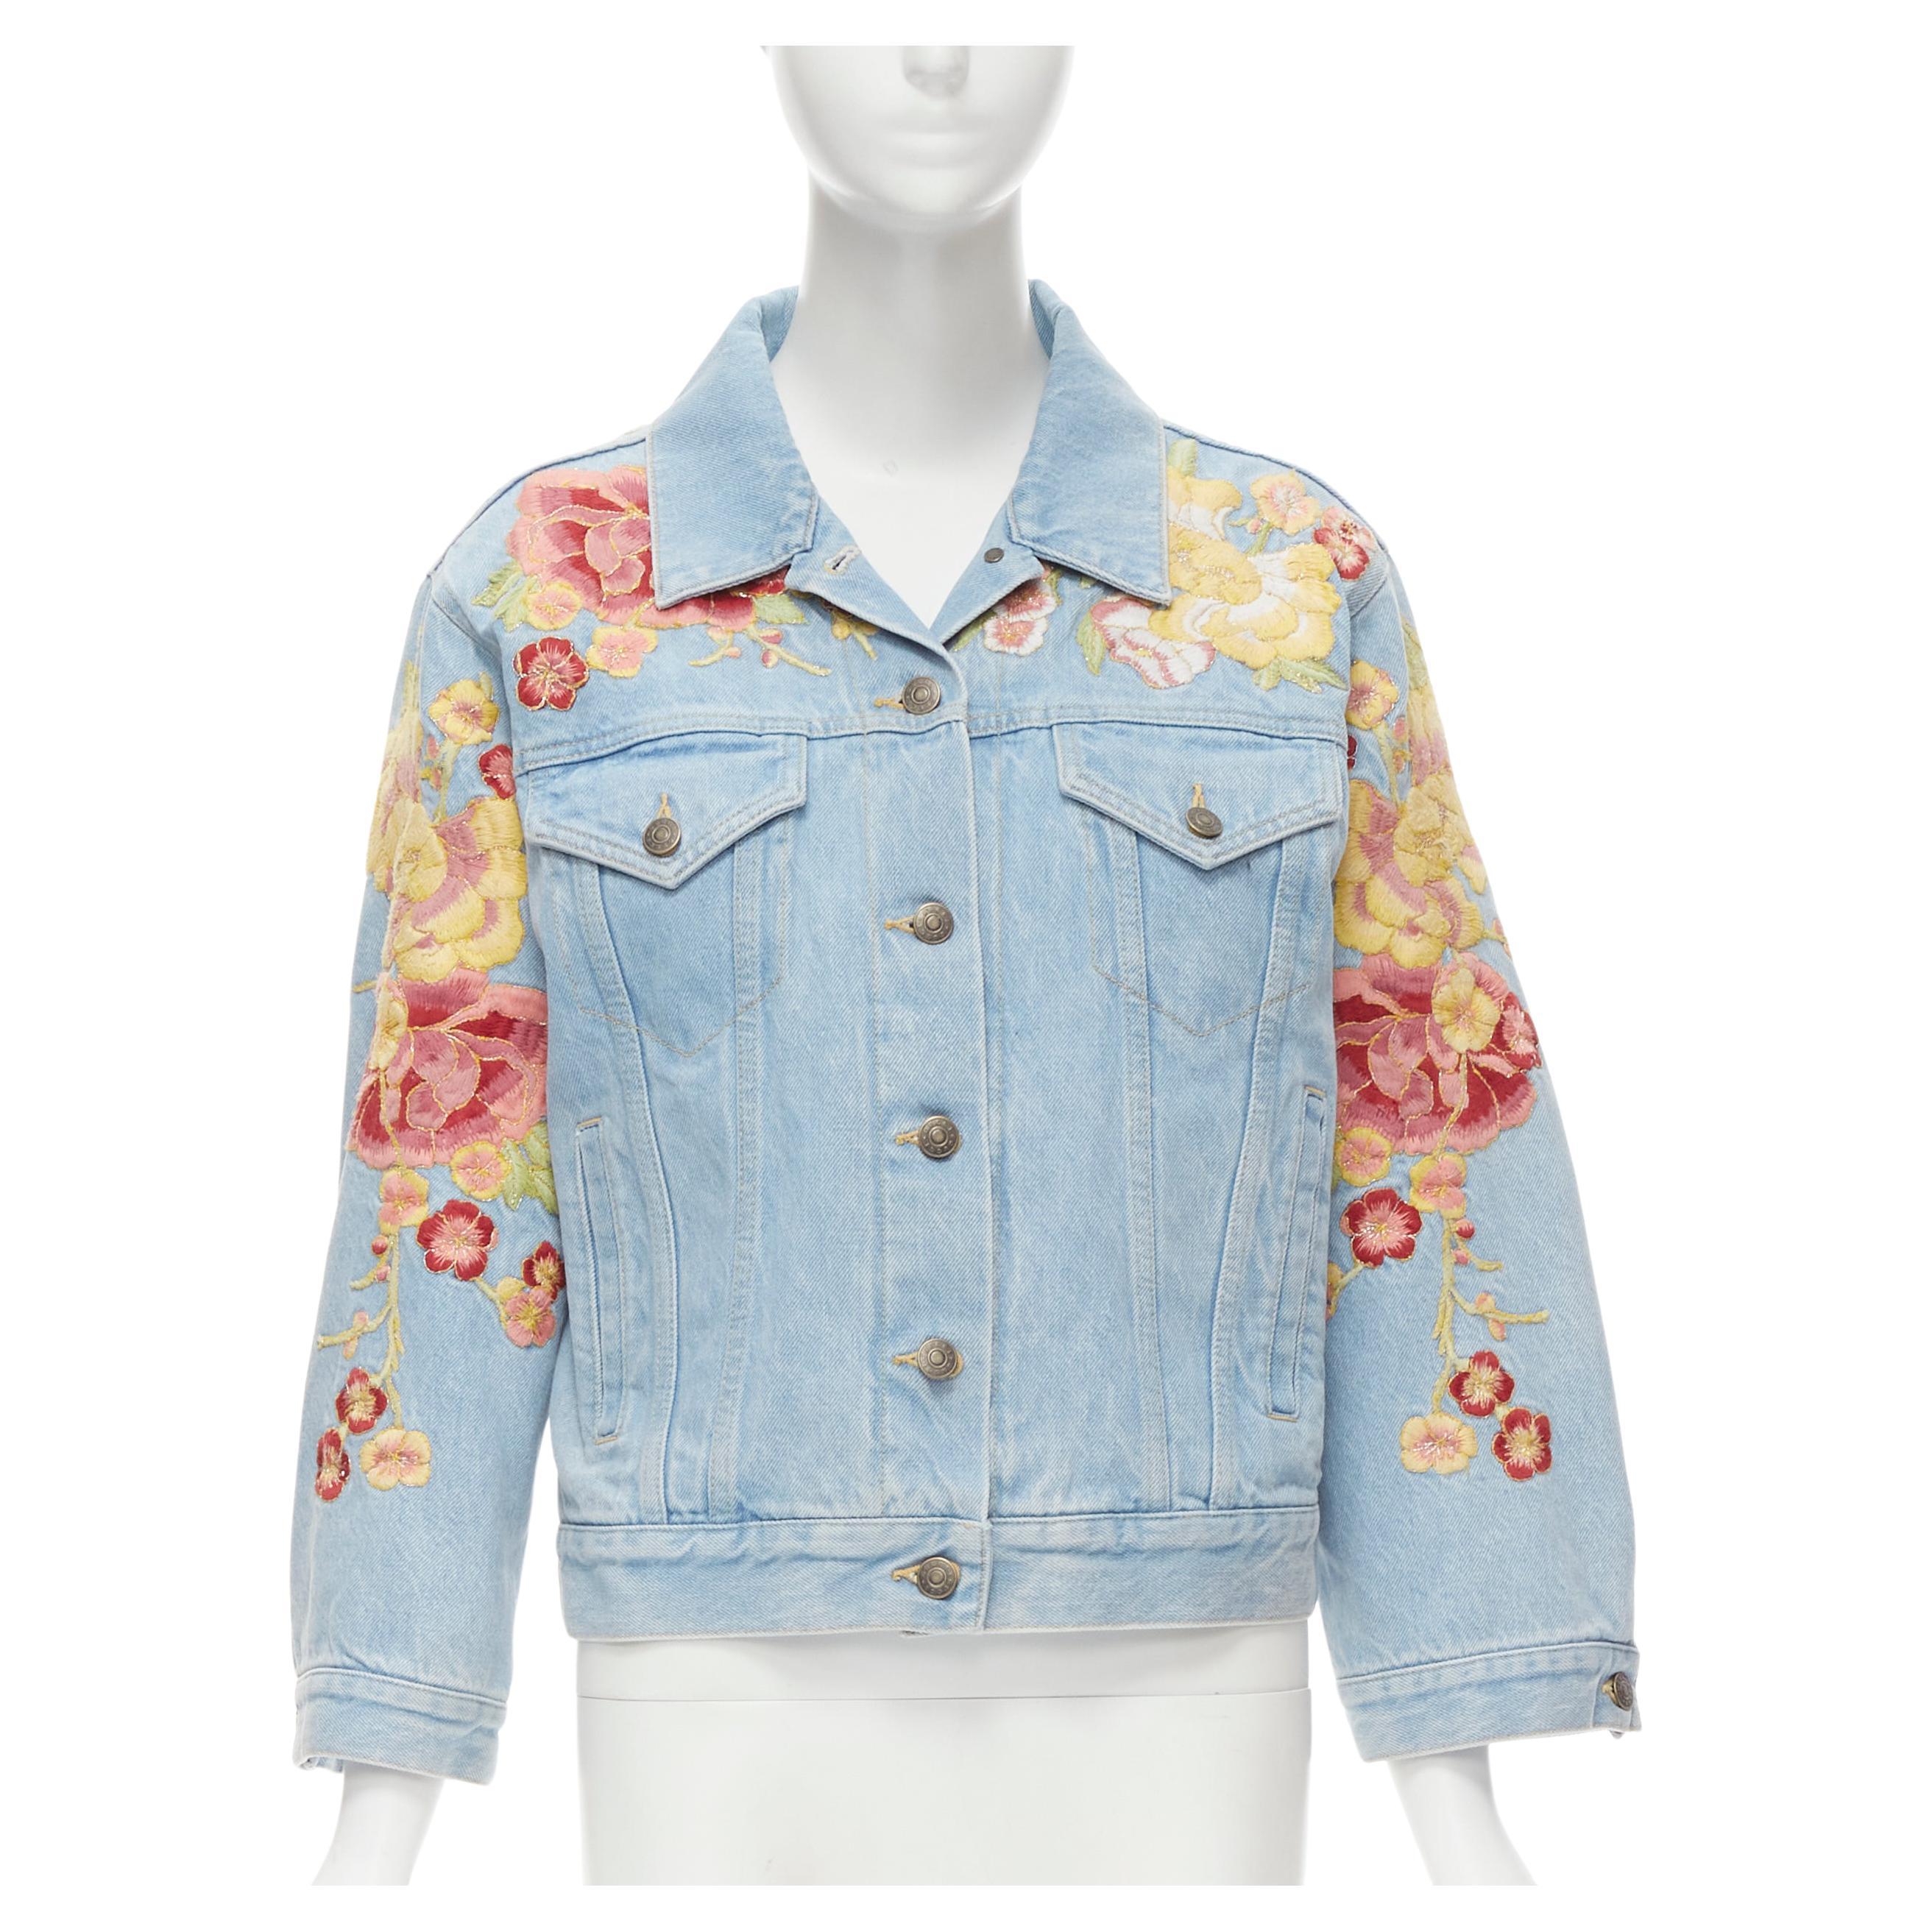 GUCCI 2018 oriental blossom floral embroidery light blue washed denim trucker jacket IT44 M 
Reference: MELK/A00022 
Brand: Gucci 
Designer: Alessandro Michele 
Collection: 2018 
Material: Denim 
Color: Blue 
Pattern: Floral 
Closure: Button 
Extra